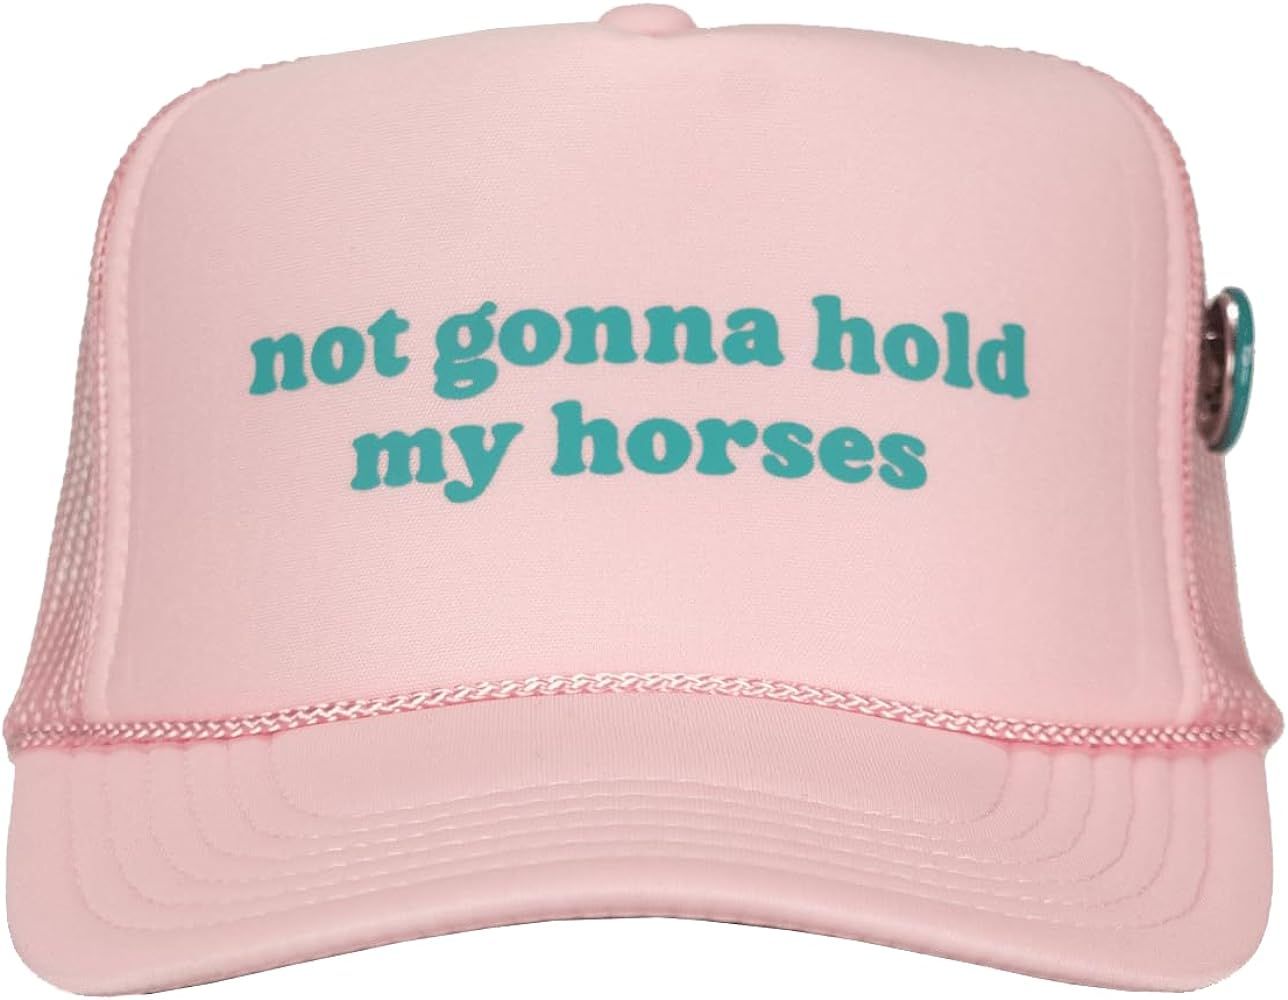 Not Gonna Hold My Horses Original Trucker Hat - Trendy Vintage Funny Cute Cowboy Cowgirl Country ... | Amazon (US)